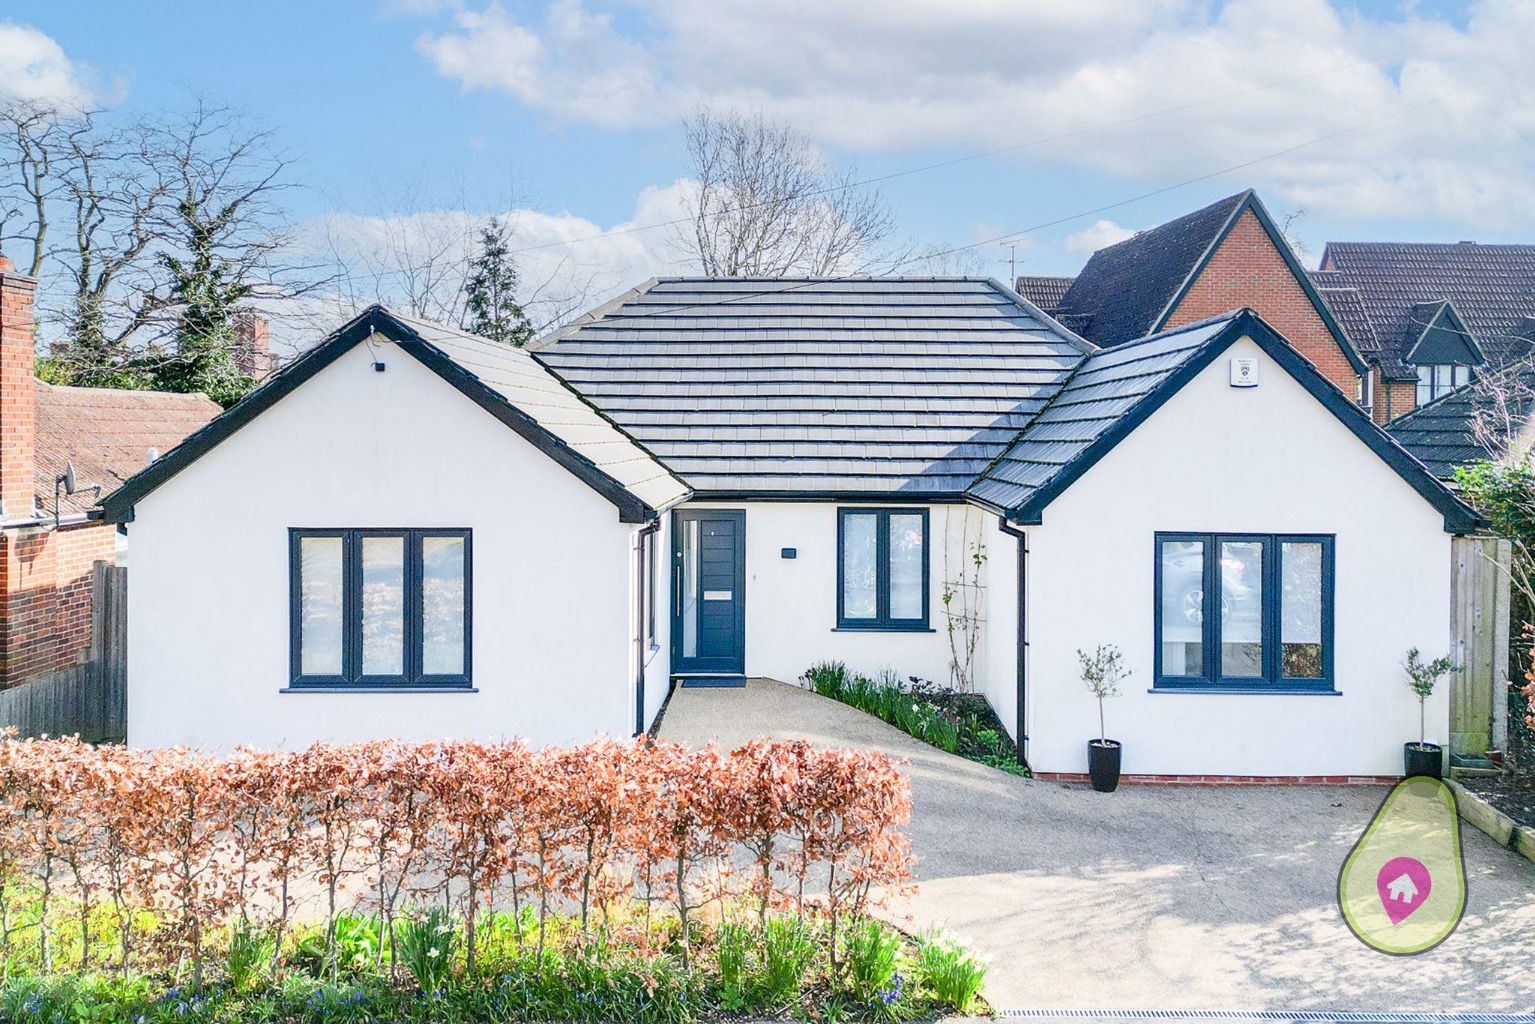 4 bed detached bungalow for sale in The Mount, Reading - Property Image 1